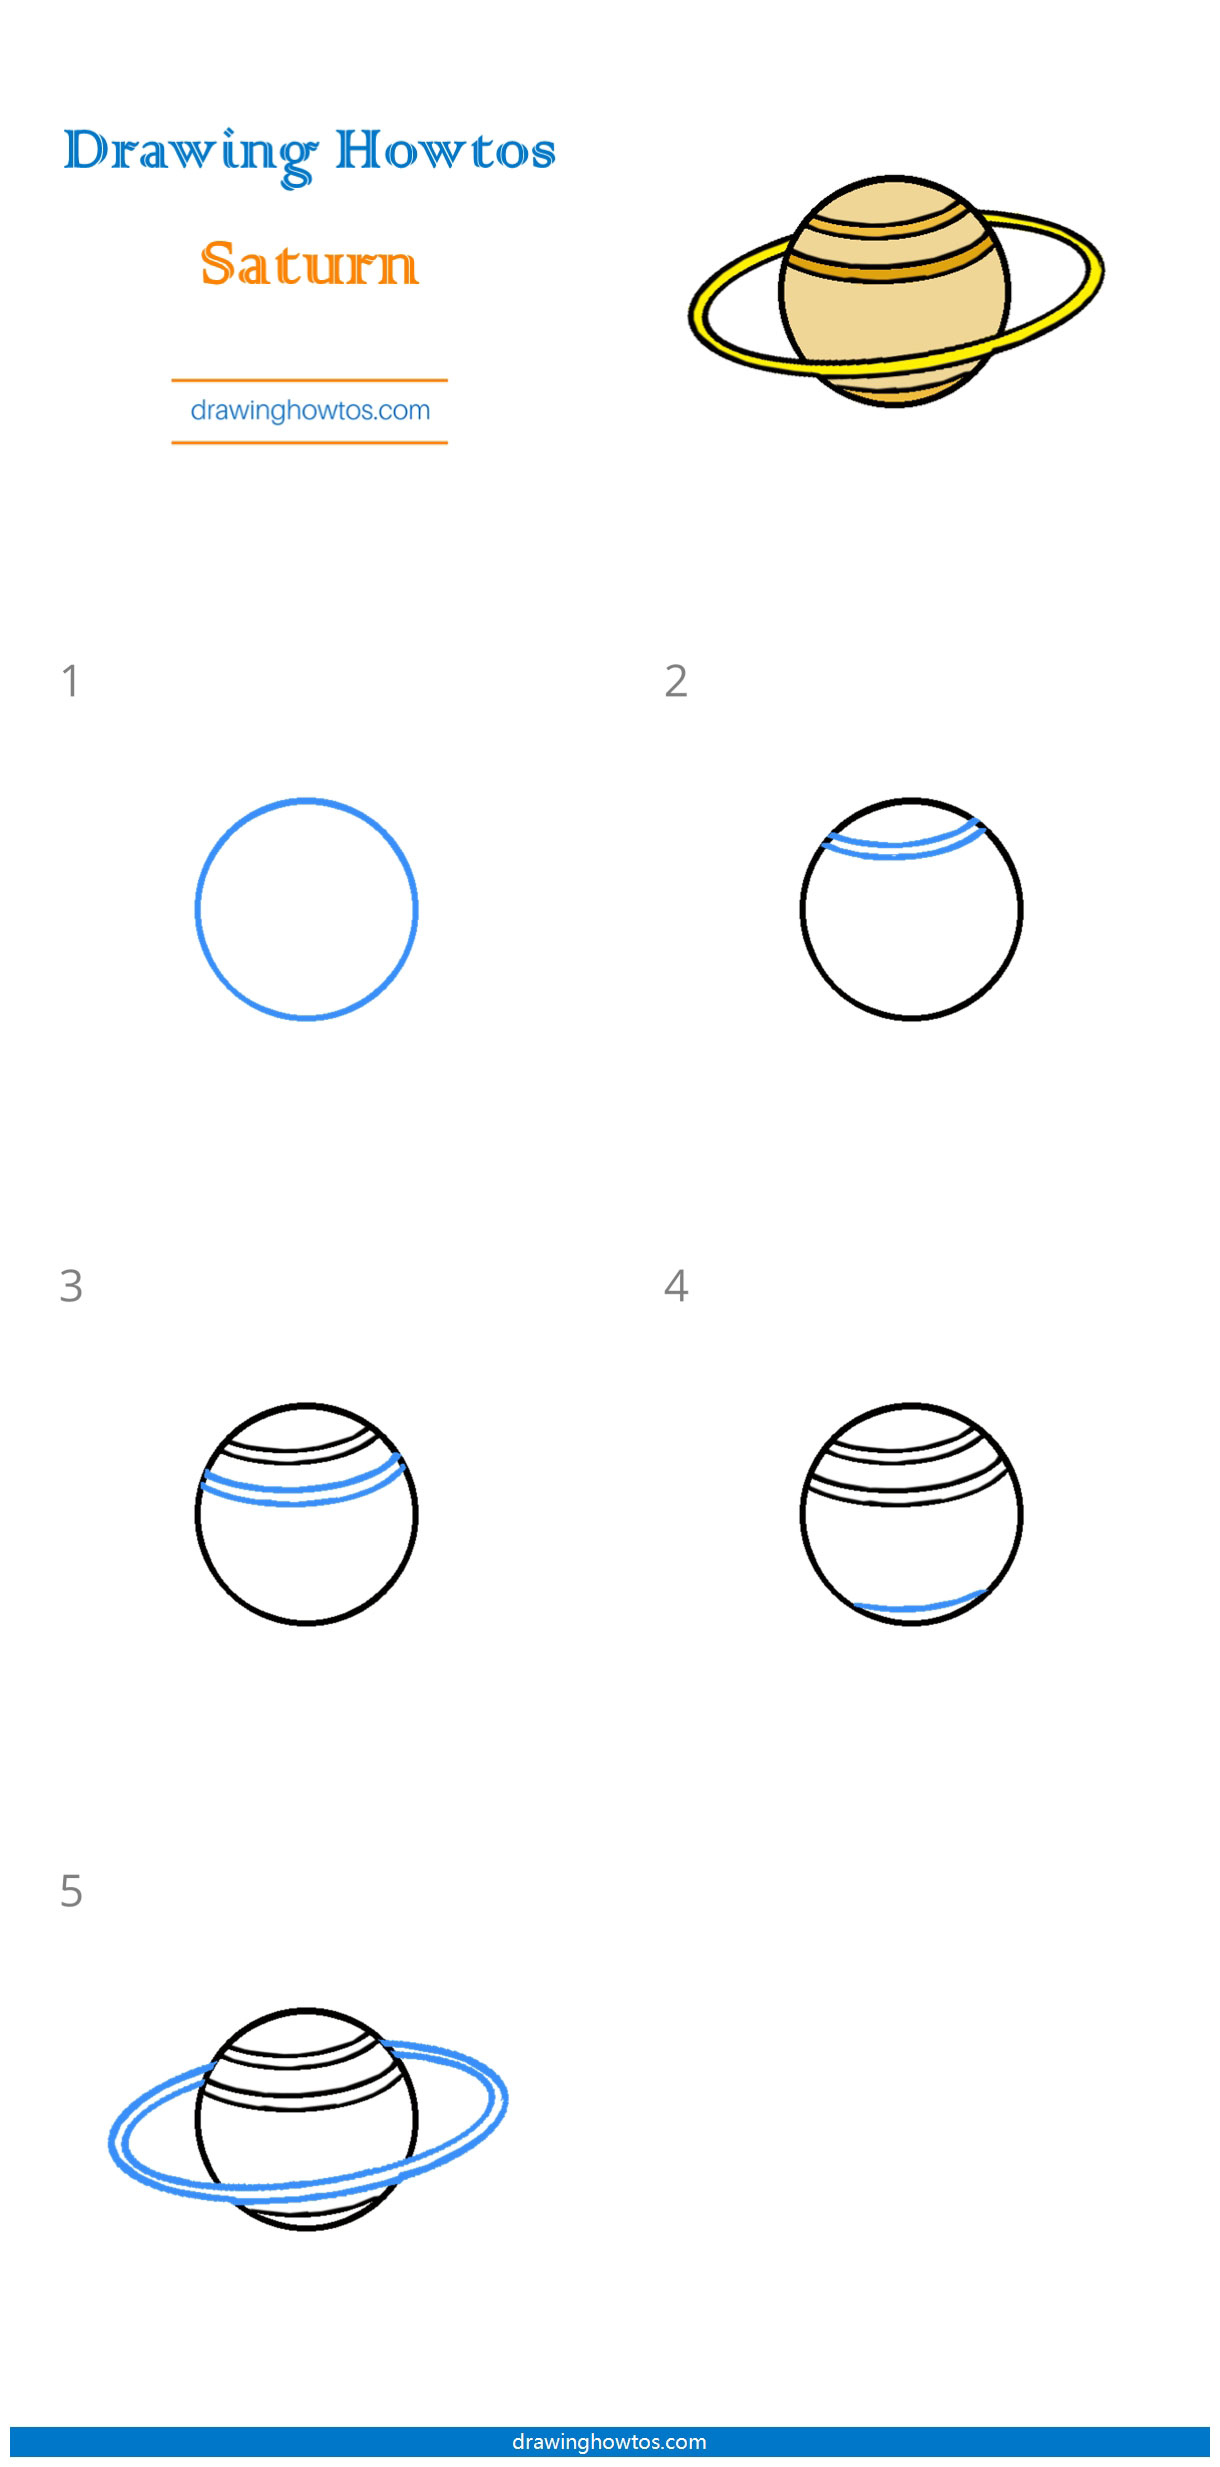 How to Draw the Saturn Step by Step